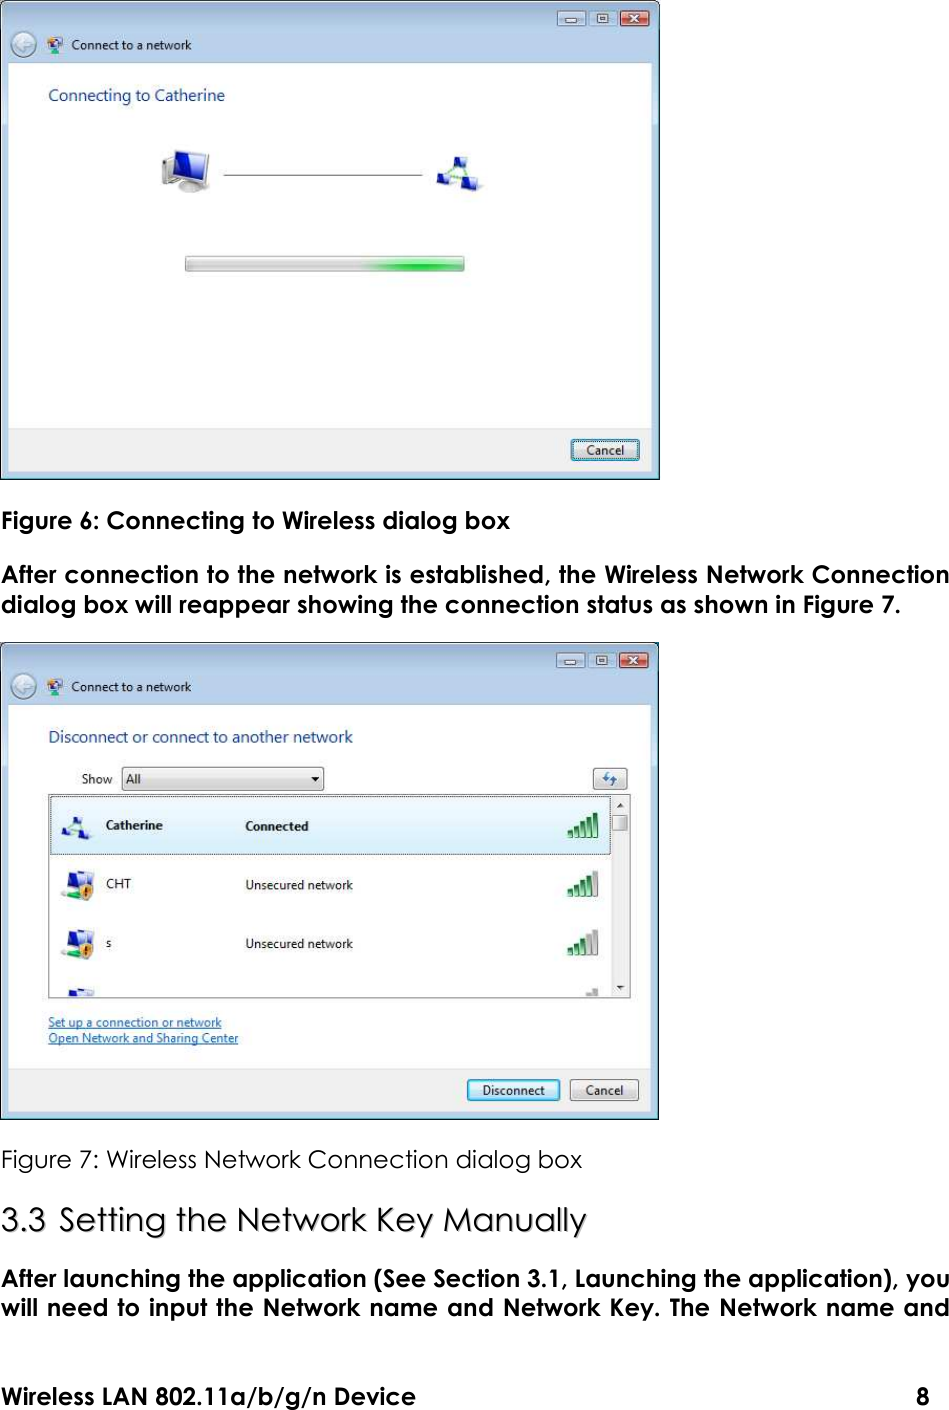 Wireless LAN 802.11a/b/g/n Device                                                                                  8  Figure 6: Connecting to Wireless dialog box After connection to the network is established, the Wireless Network Connection dialog box will reappear showing the connection status as shown in Figure 7.    Figure 7: Wireless Network Connection dialog box 33..33  SSeettttiinngg  tthhee  NNeettwwoorrkk  KKeeyy  MMaannuuaallllyy  After launching the application (See Section 3.1, Launching the application), you will need to input the Network name and Network Key. The Network name and 